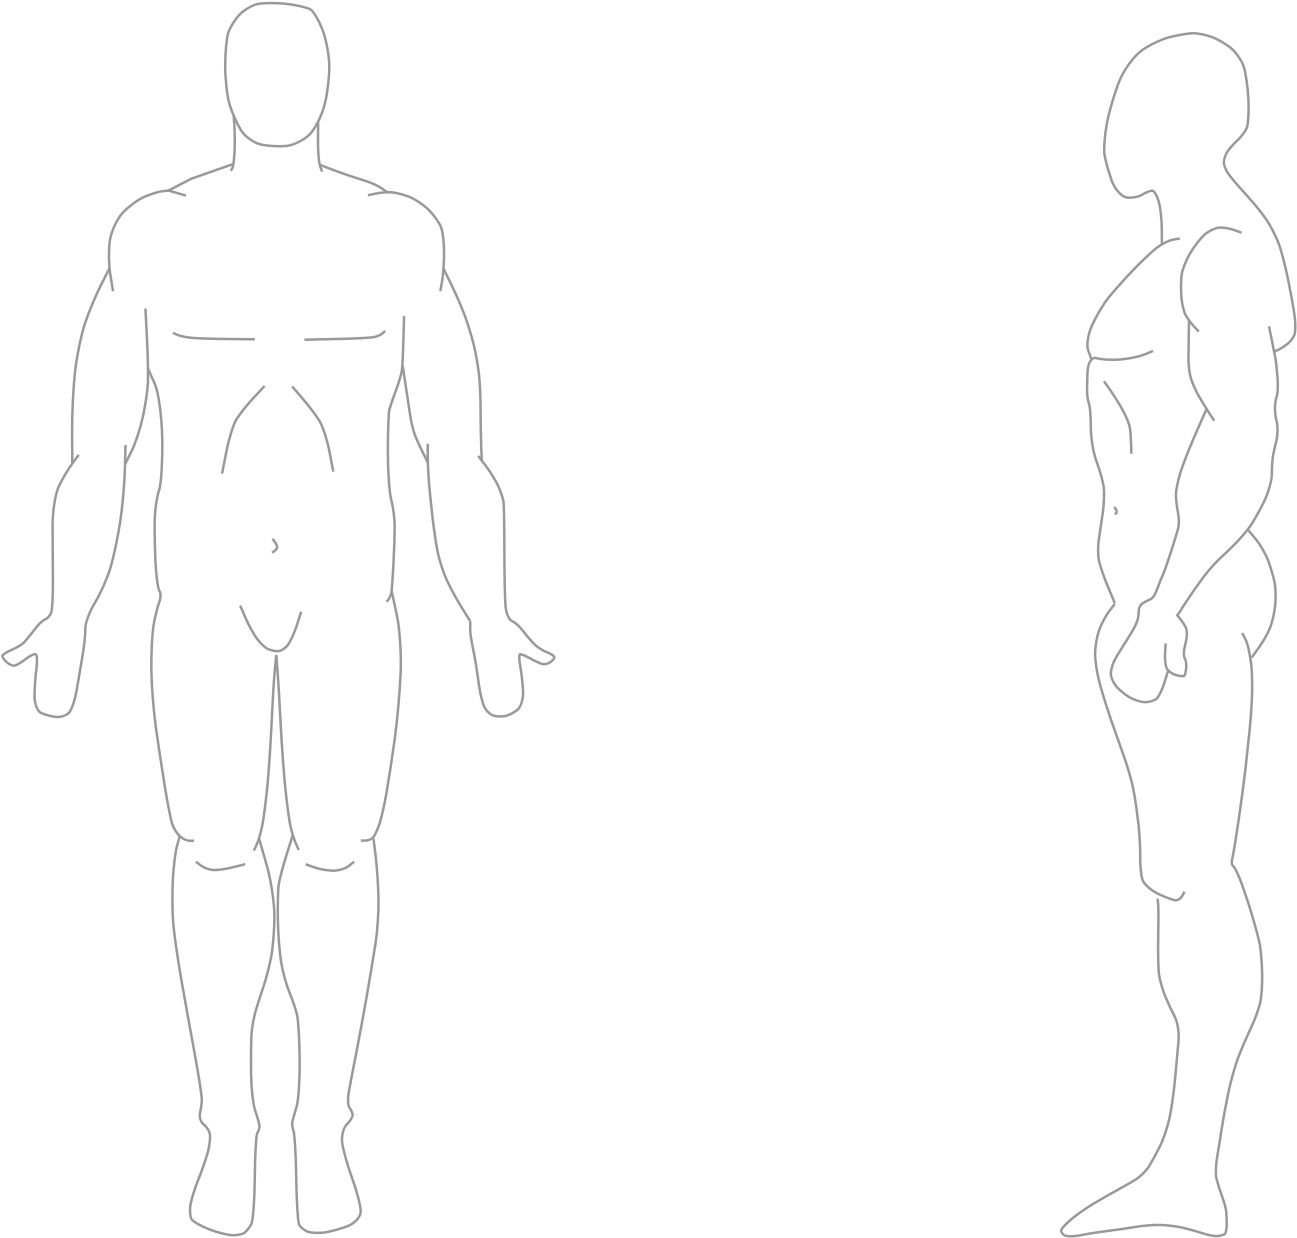 human-body-outline-png-figure-drawing-clipart-large-size-png-image